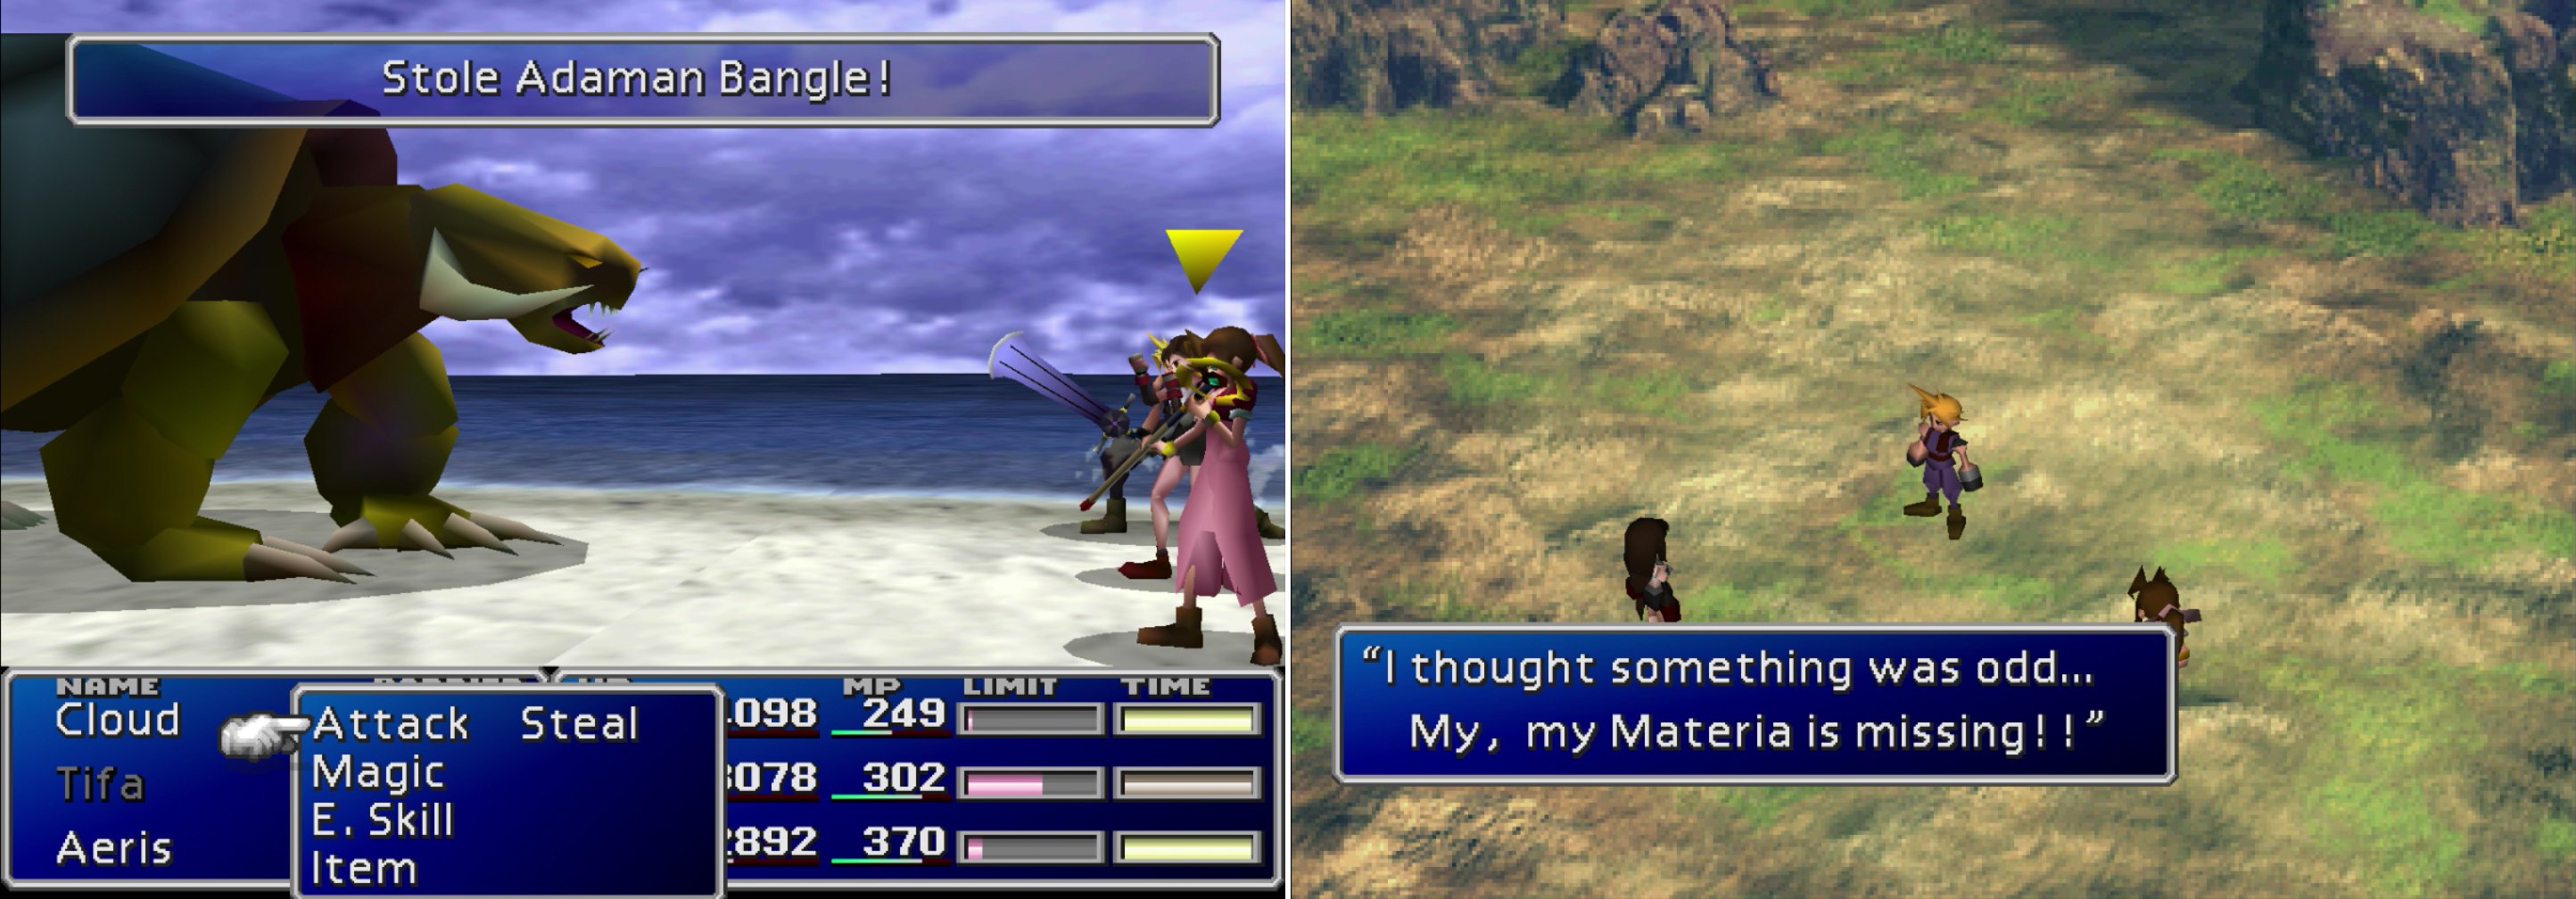 Learn the Death Force Enemy Skill from the Adamantaimai that prowl along Wutais beaches (left). After encountering some Shinra troops, the party will discover that Yuffie made off with some of their belongings (right).